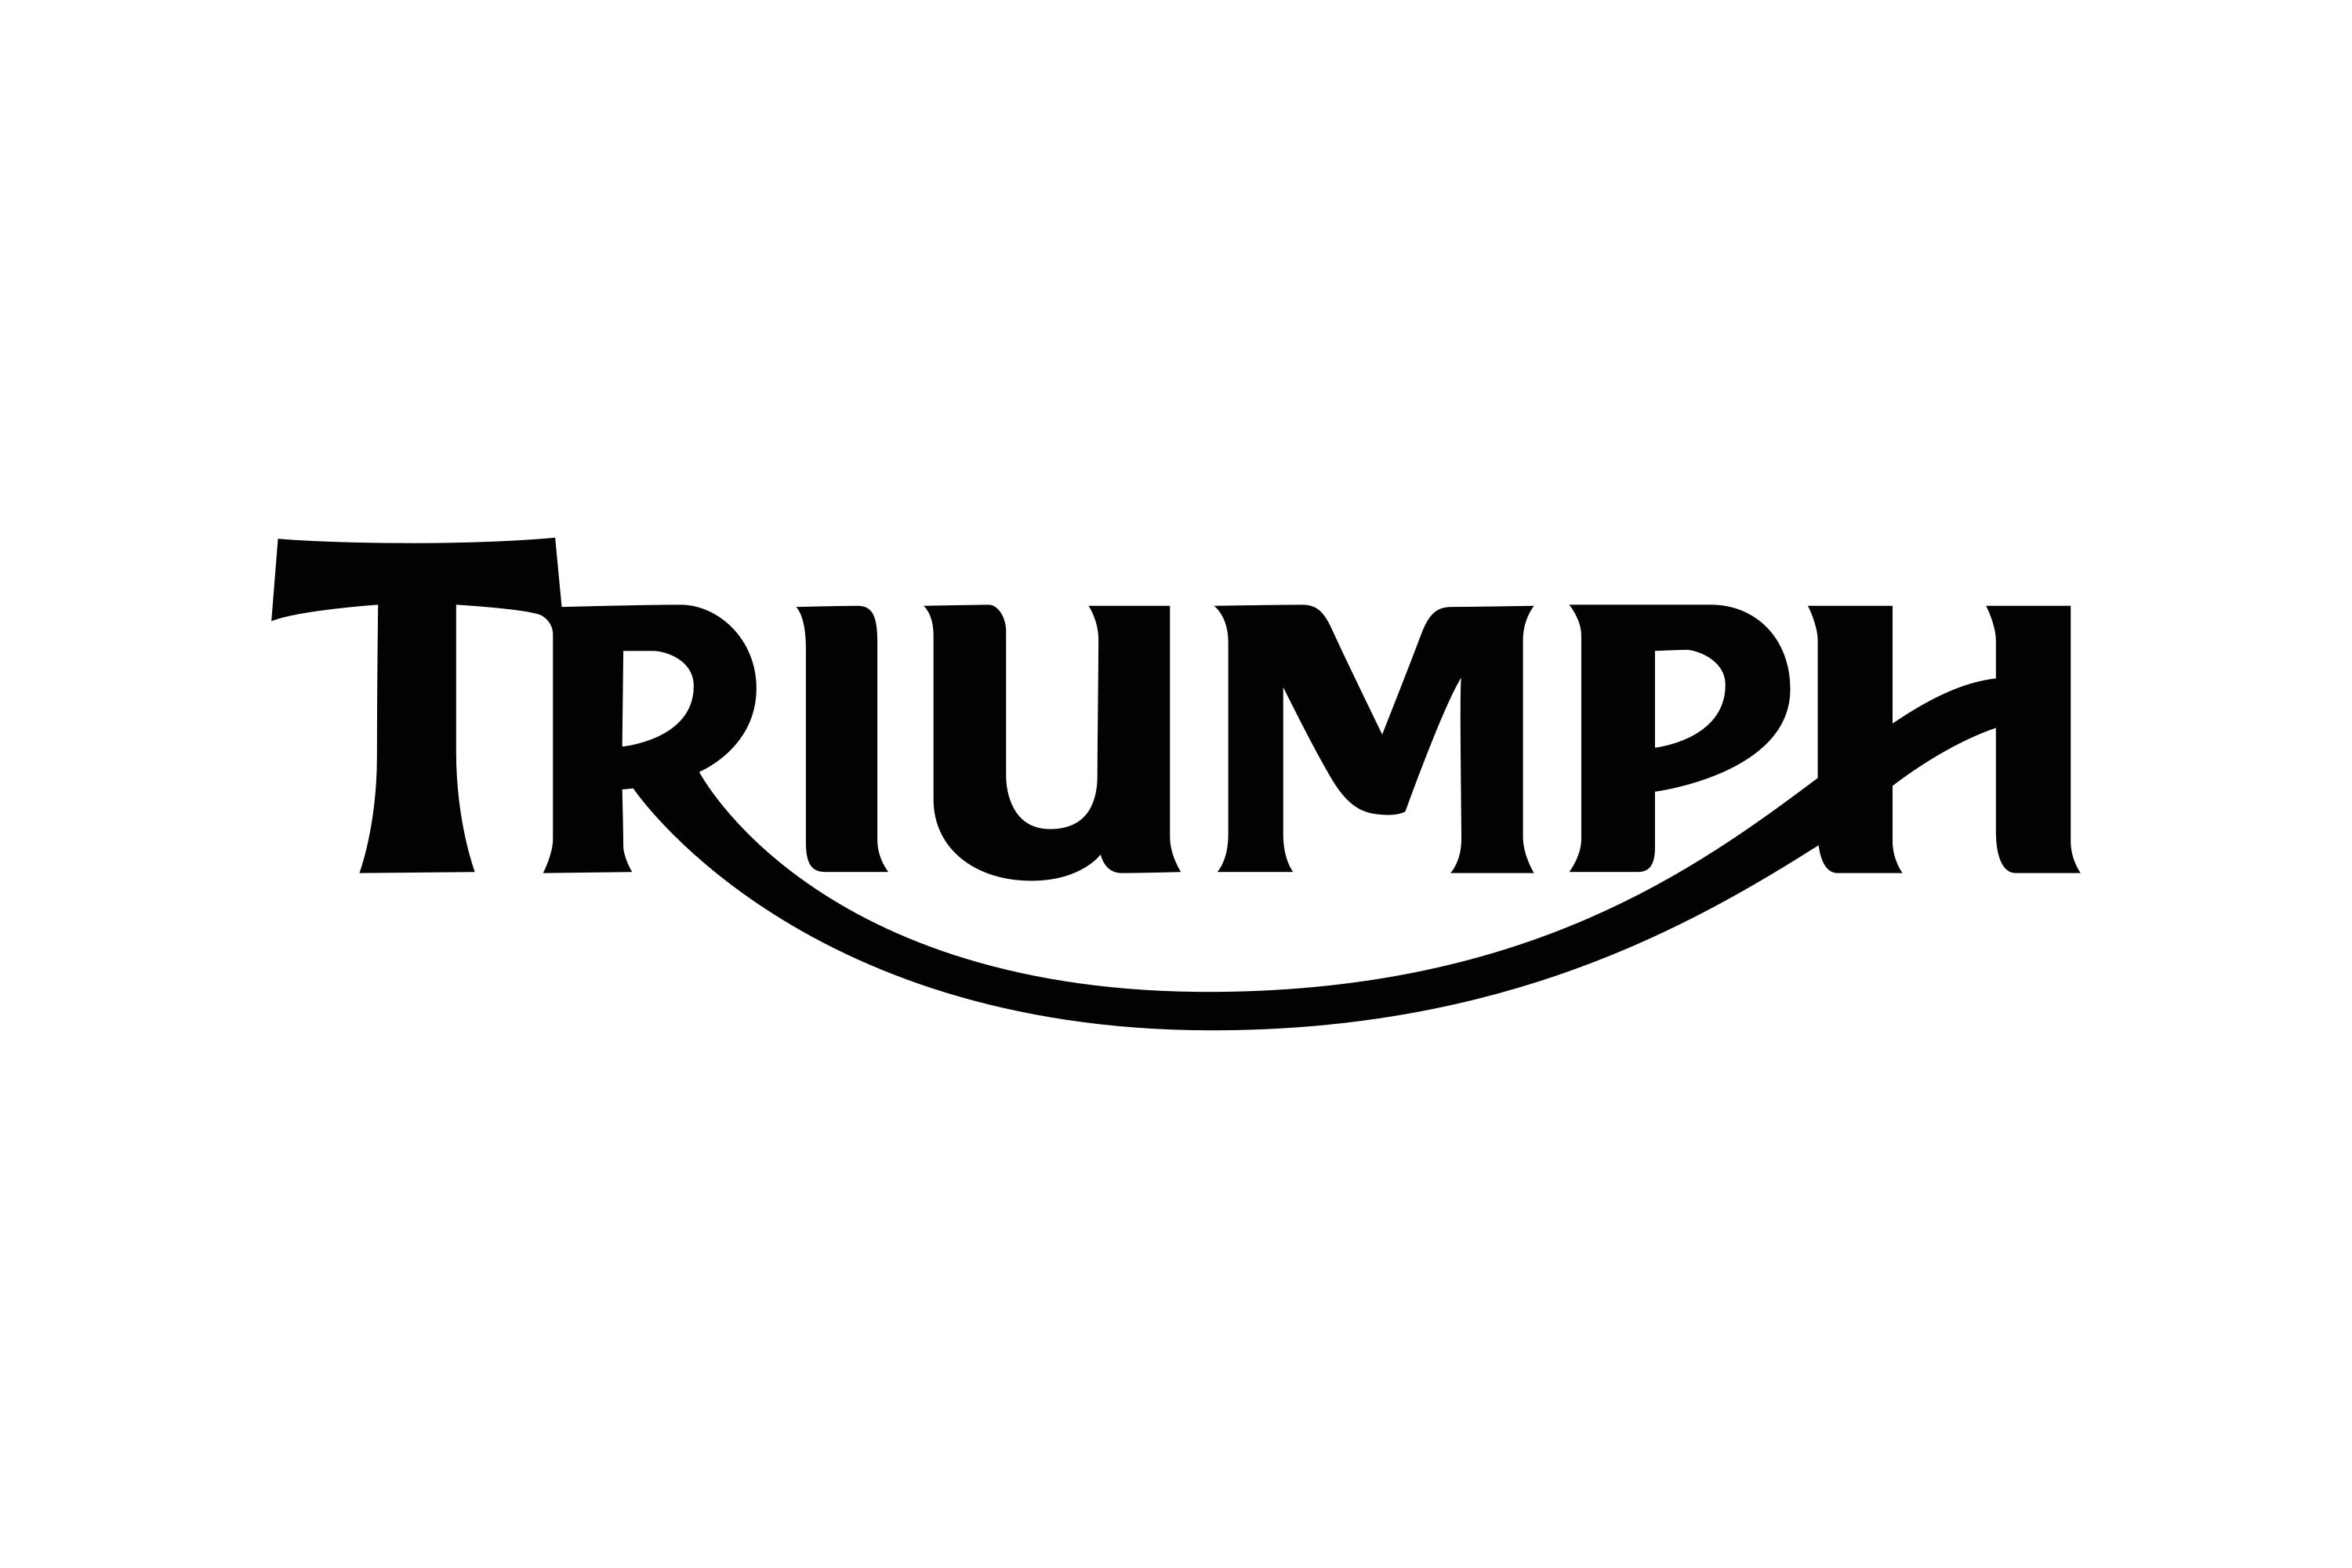 Download Triumph Motorcycles Ltd Logo in SVG Vector or PNG File Format